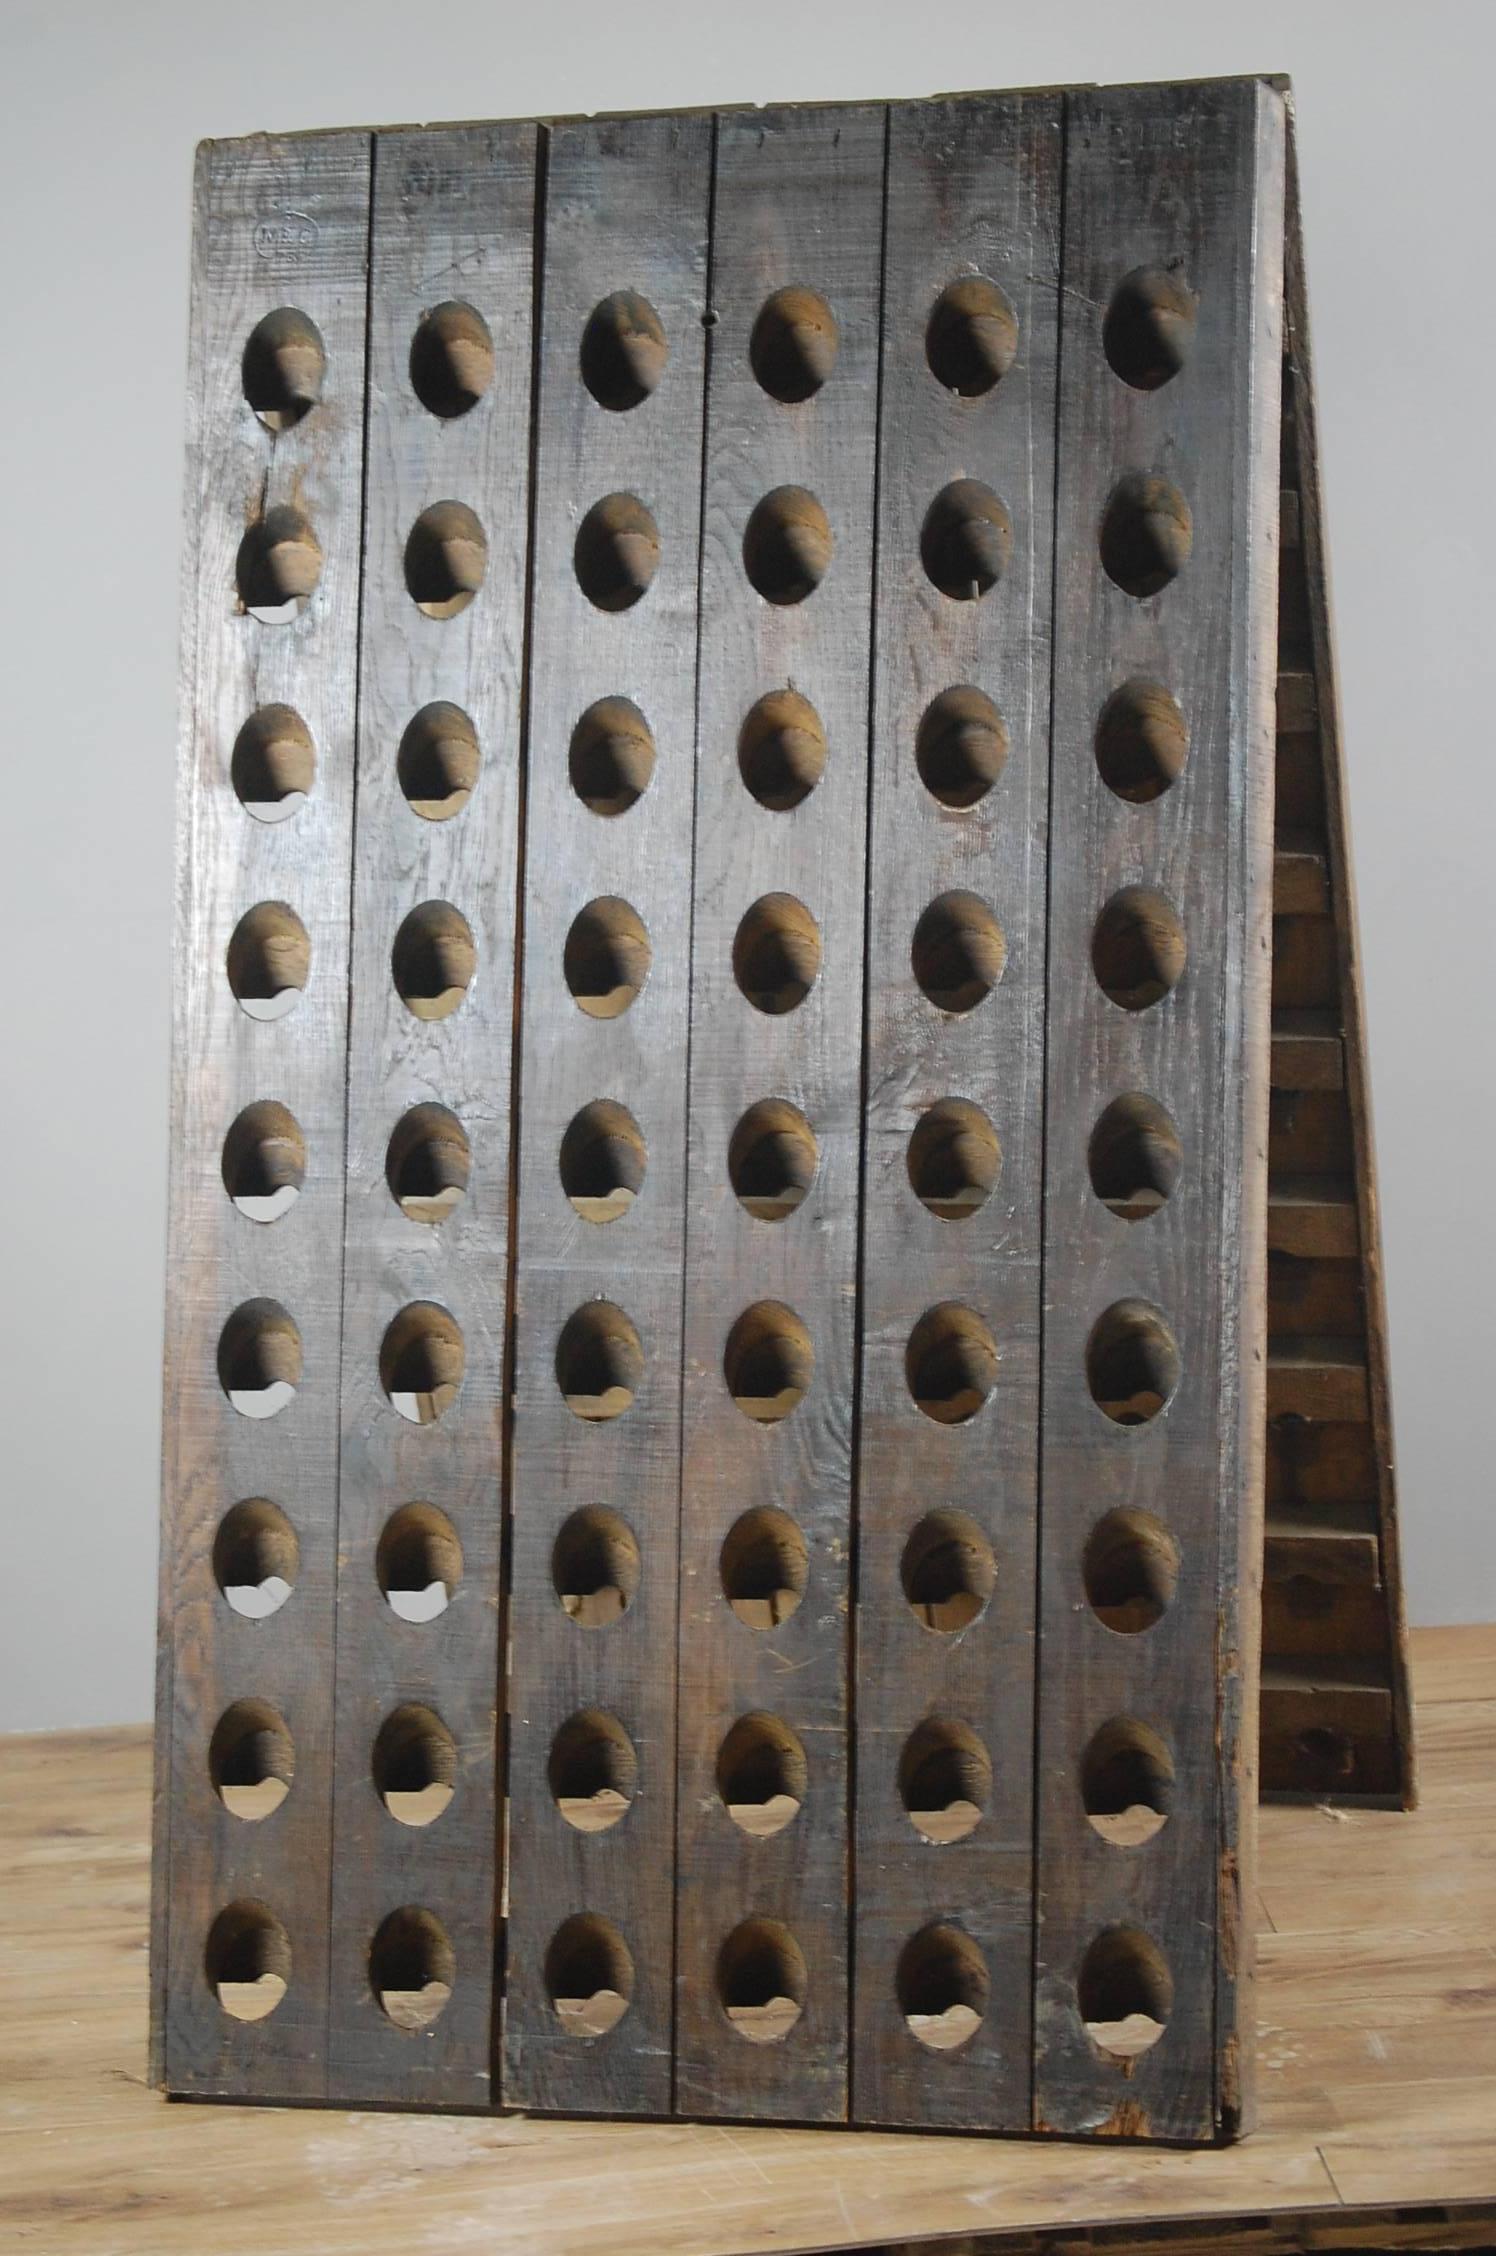 20th century Moet and Chandon oak champagne riddle rack. Used in the final stages of fermentation of Champagne, the bottles are turned daily whilst stored in these racks. This particular example is from the Moet & Chandon producer and is marked as